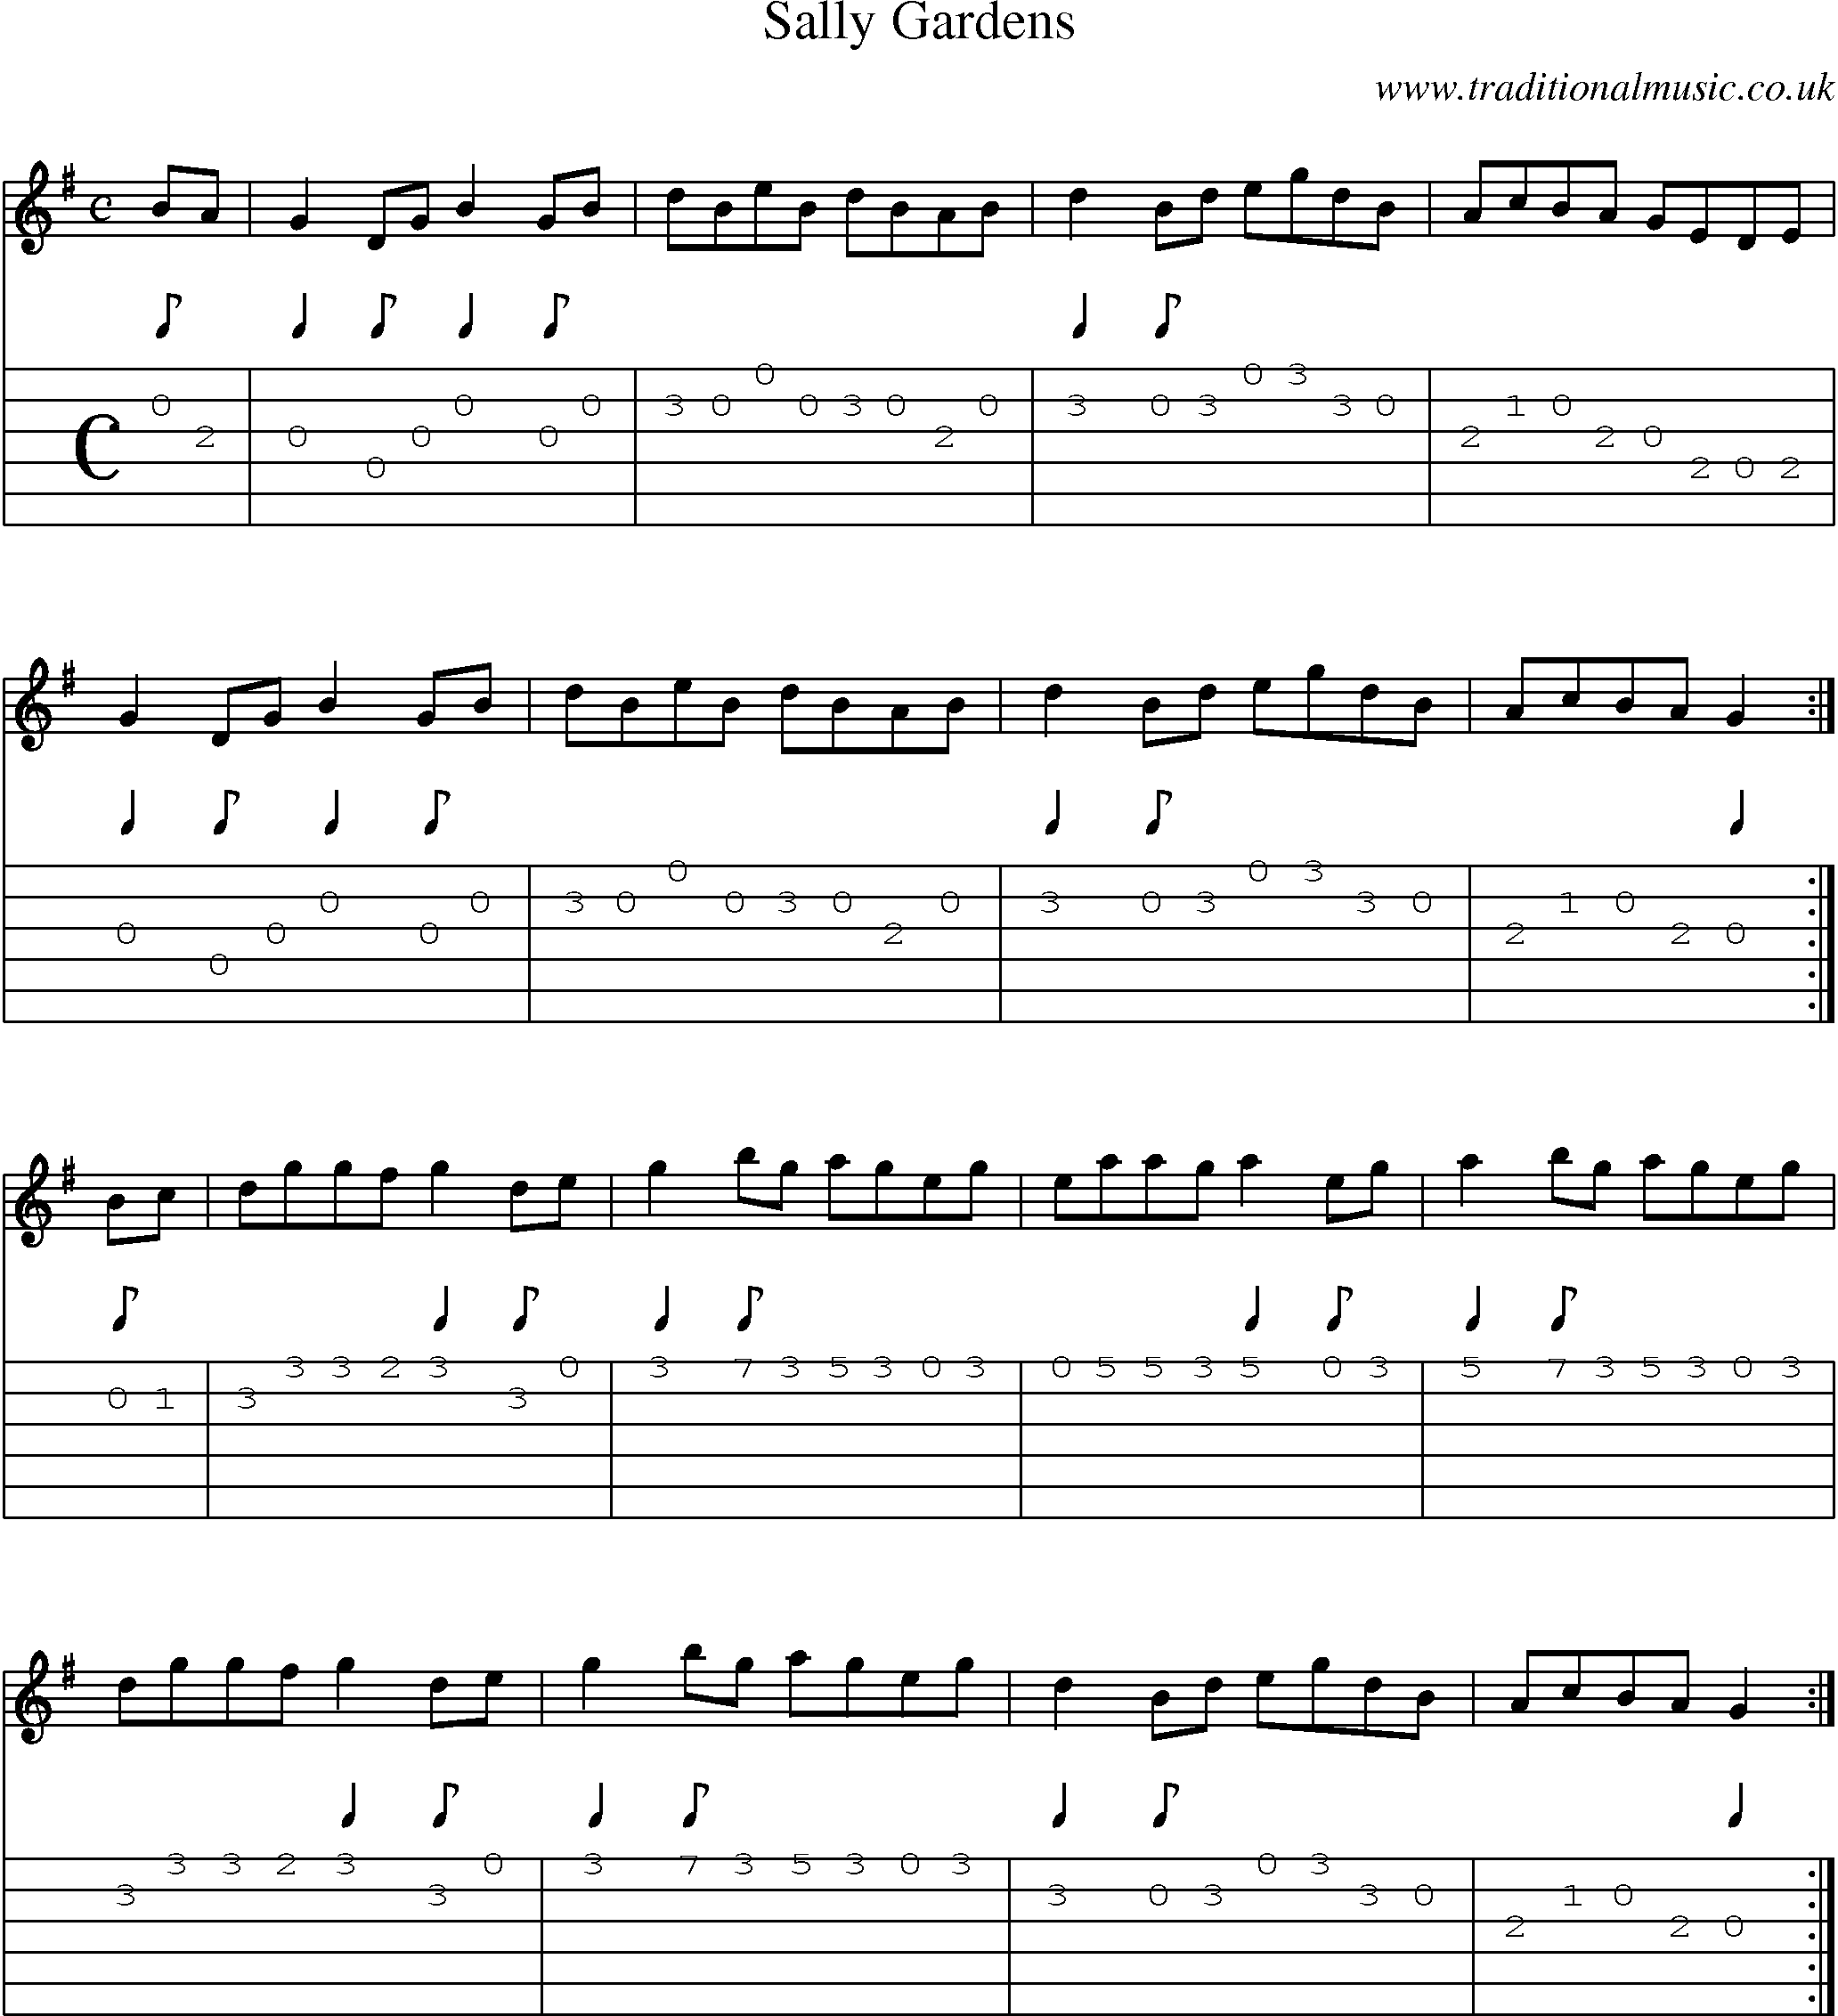 Music Score and Guitar Tabs for Sally Gardens